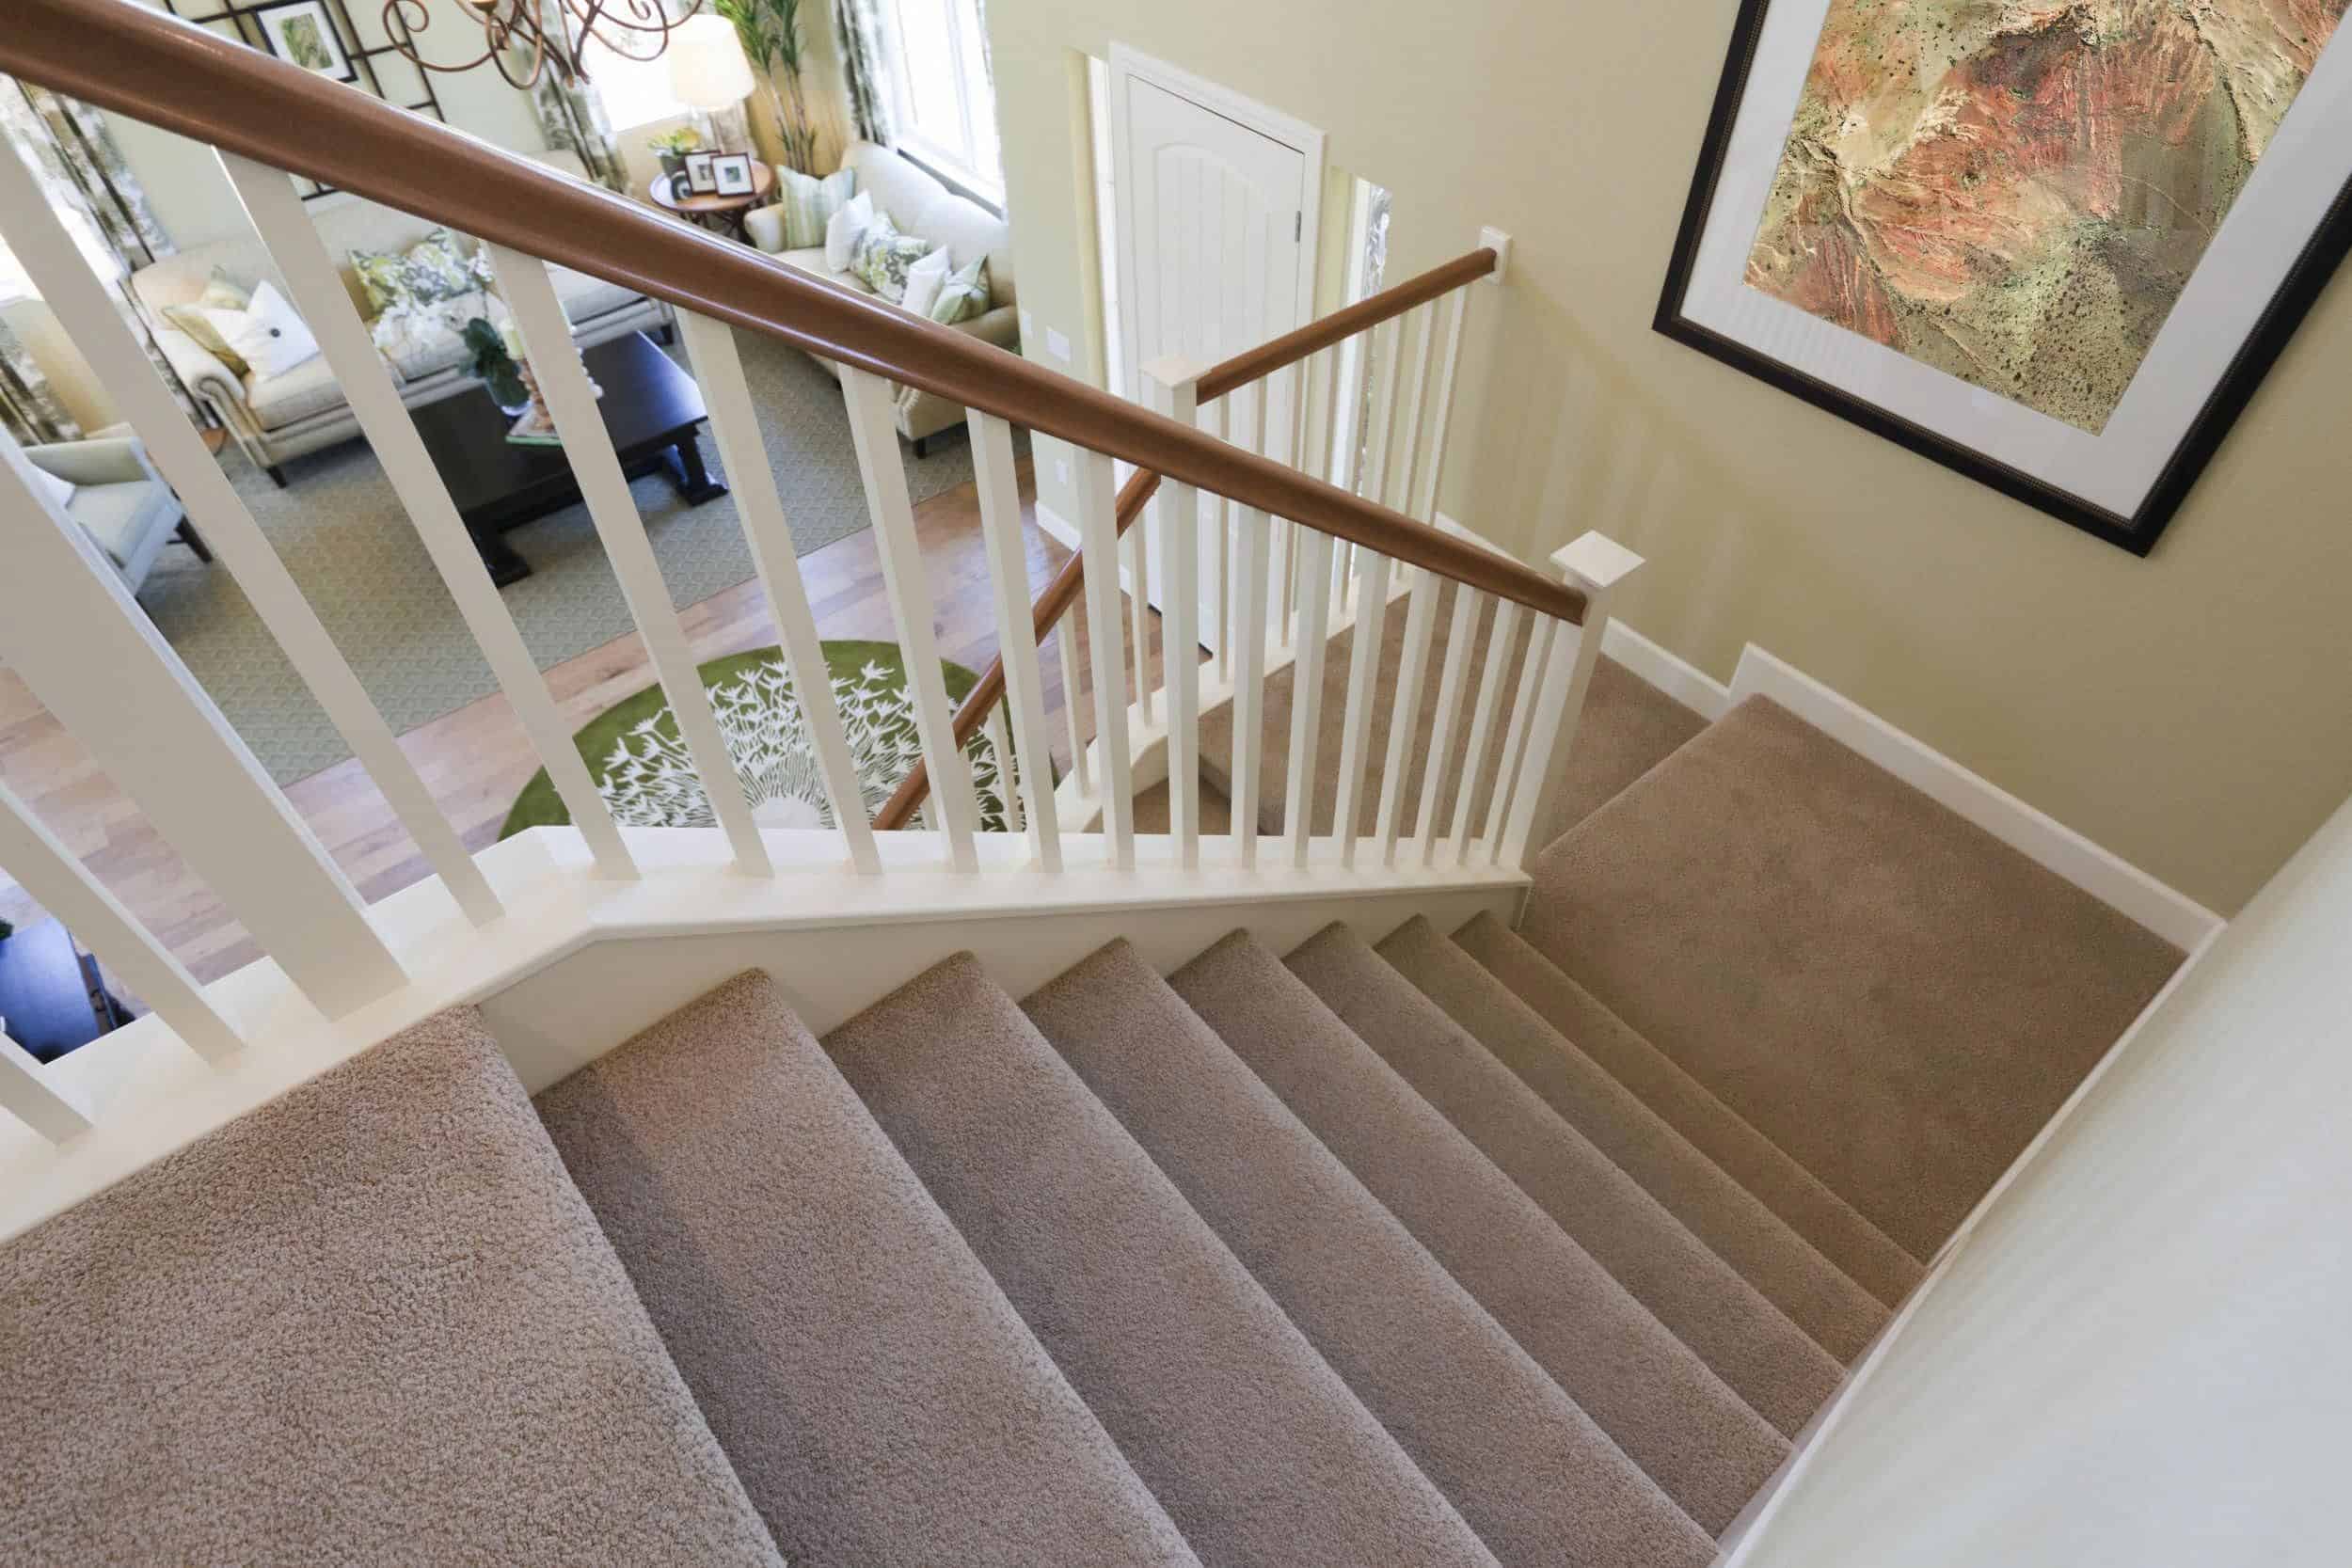 carpet-in-stairs-2880067